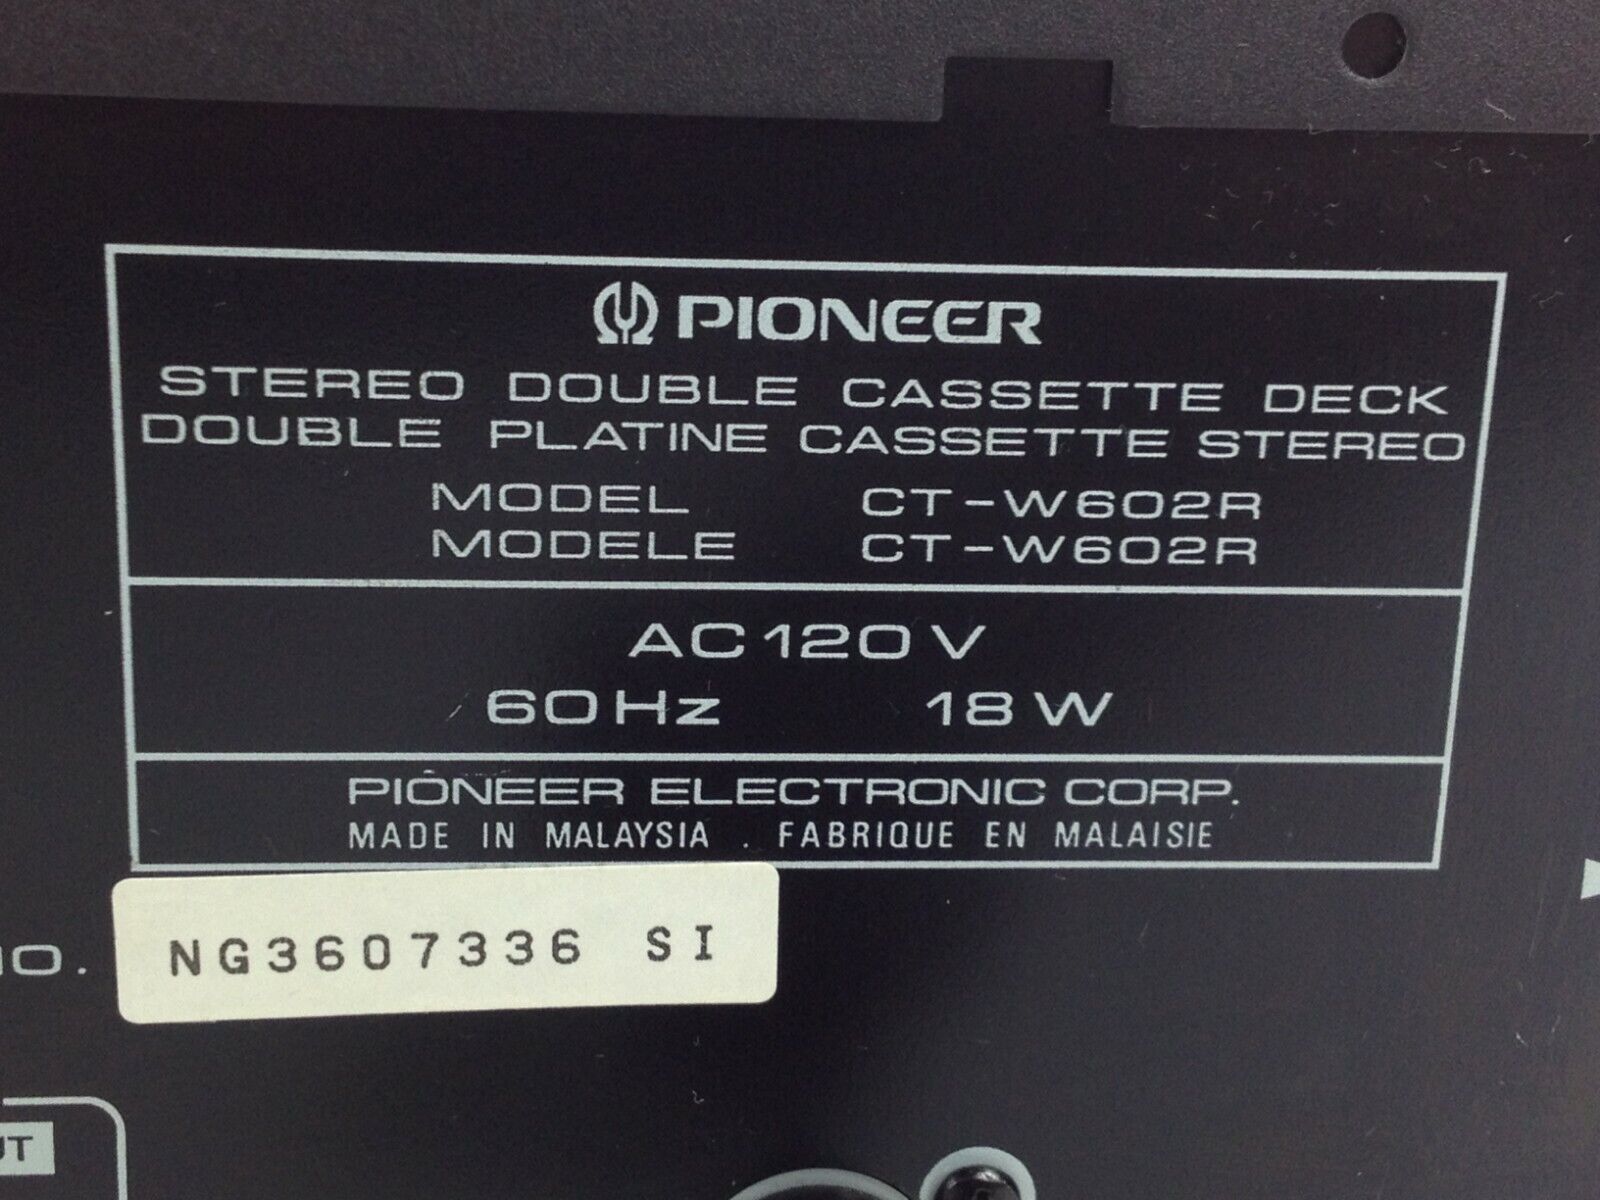 Pioneer CT-W602R Stereo Double Cassette Deck